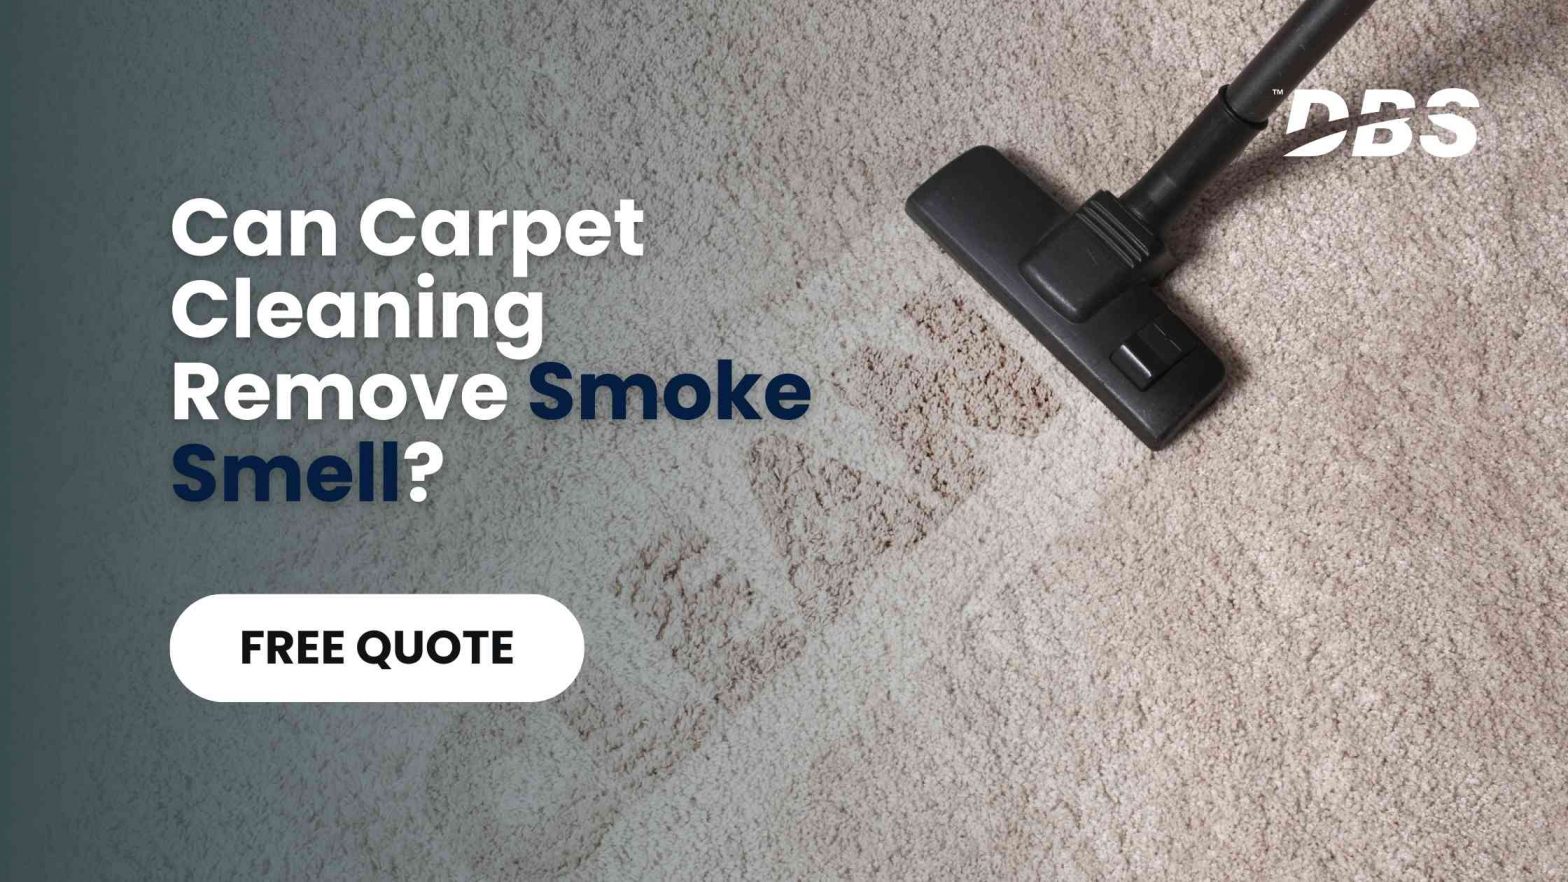 Can Carpet Cleaning Remove Smoke